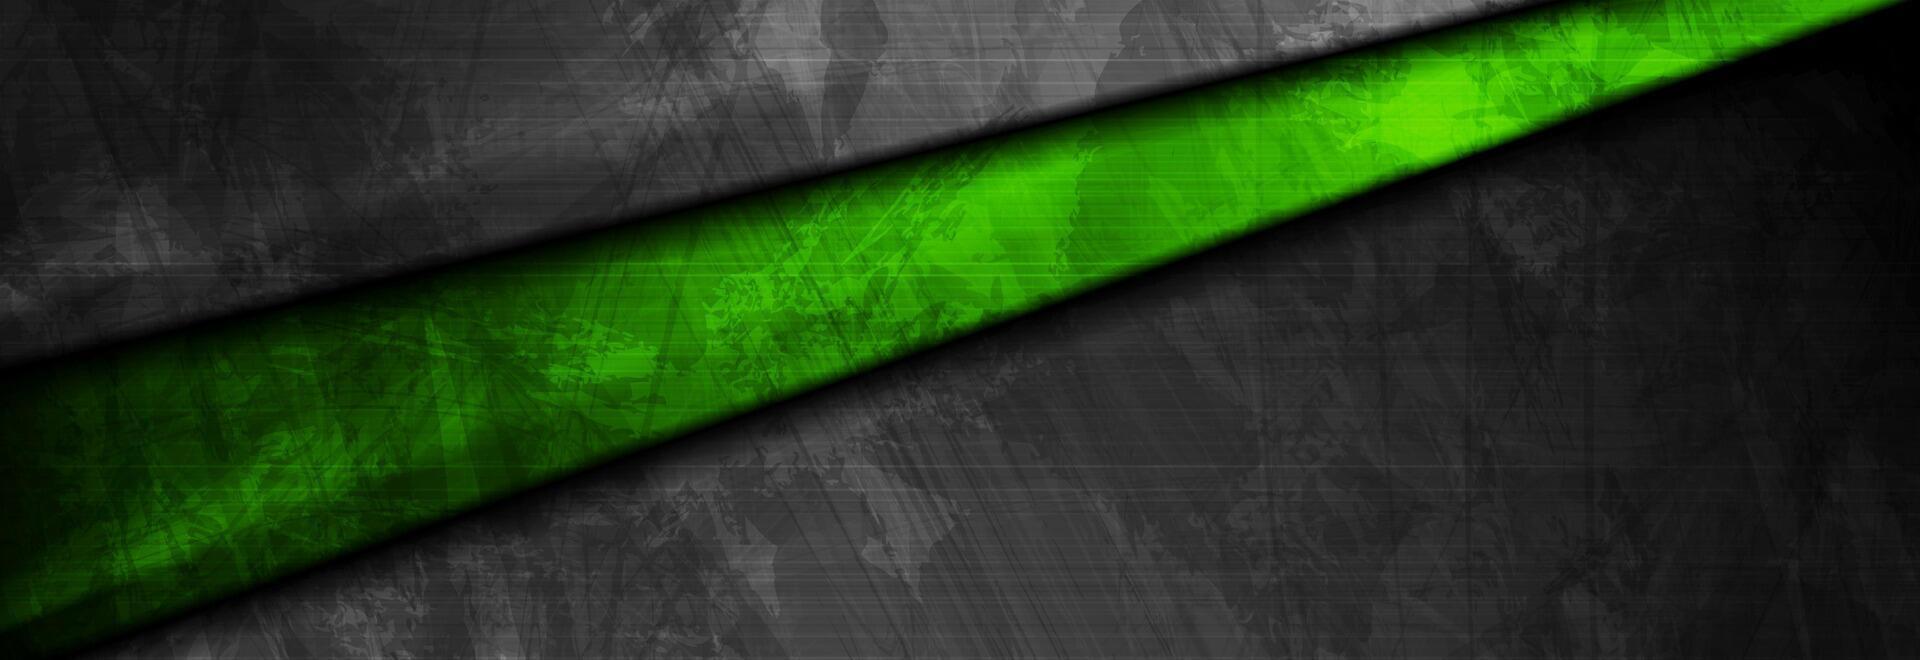 Black and green abstract grunge corporate background vector